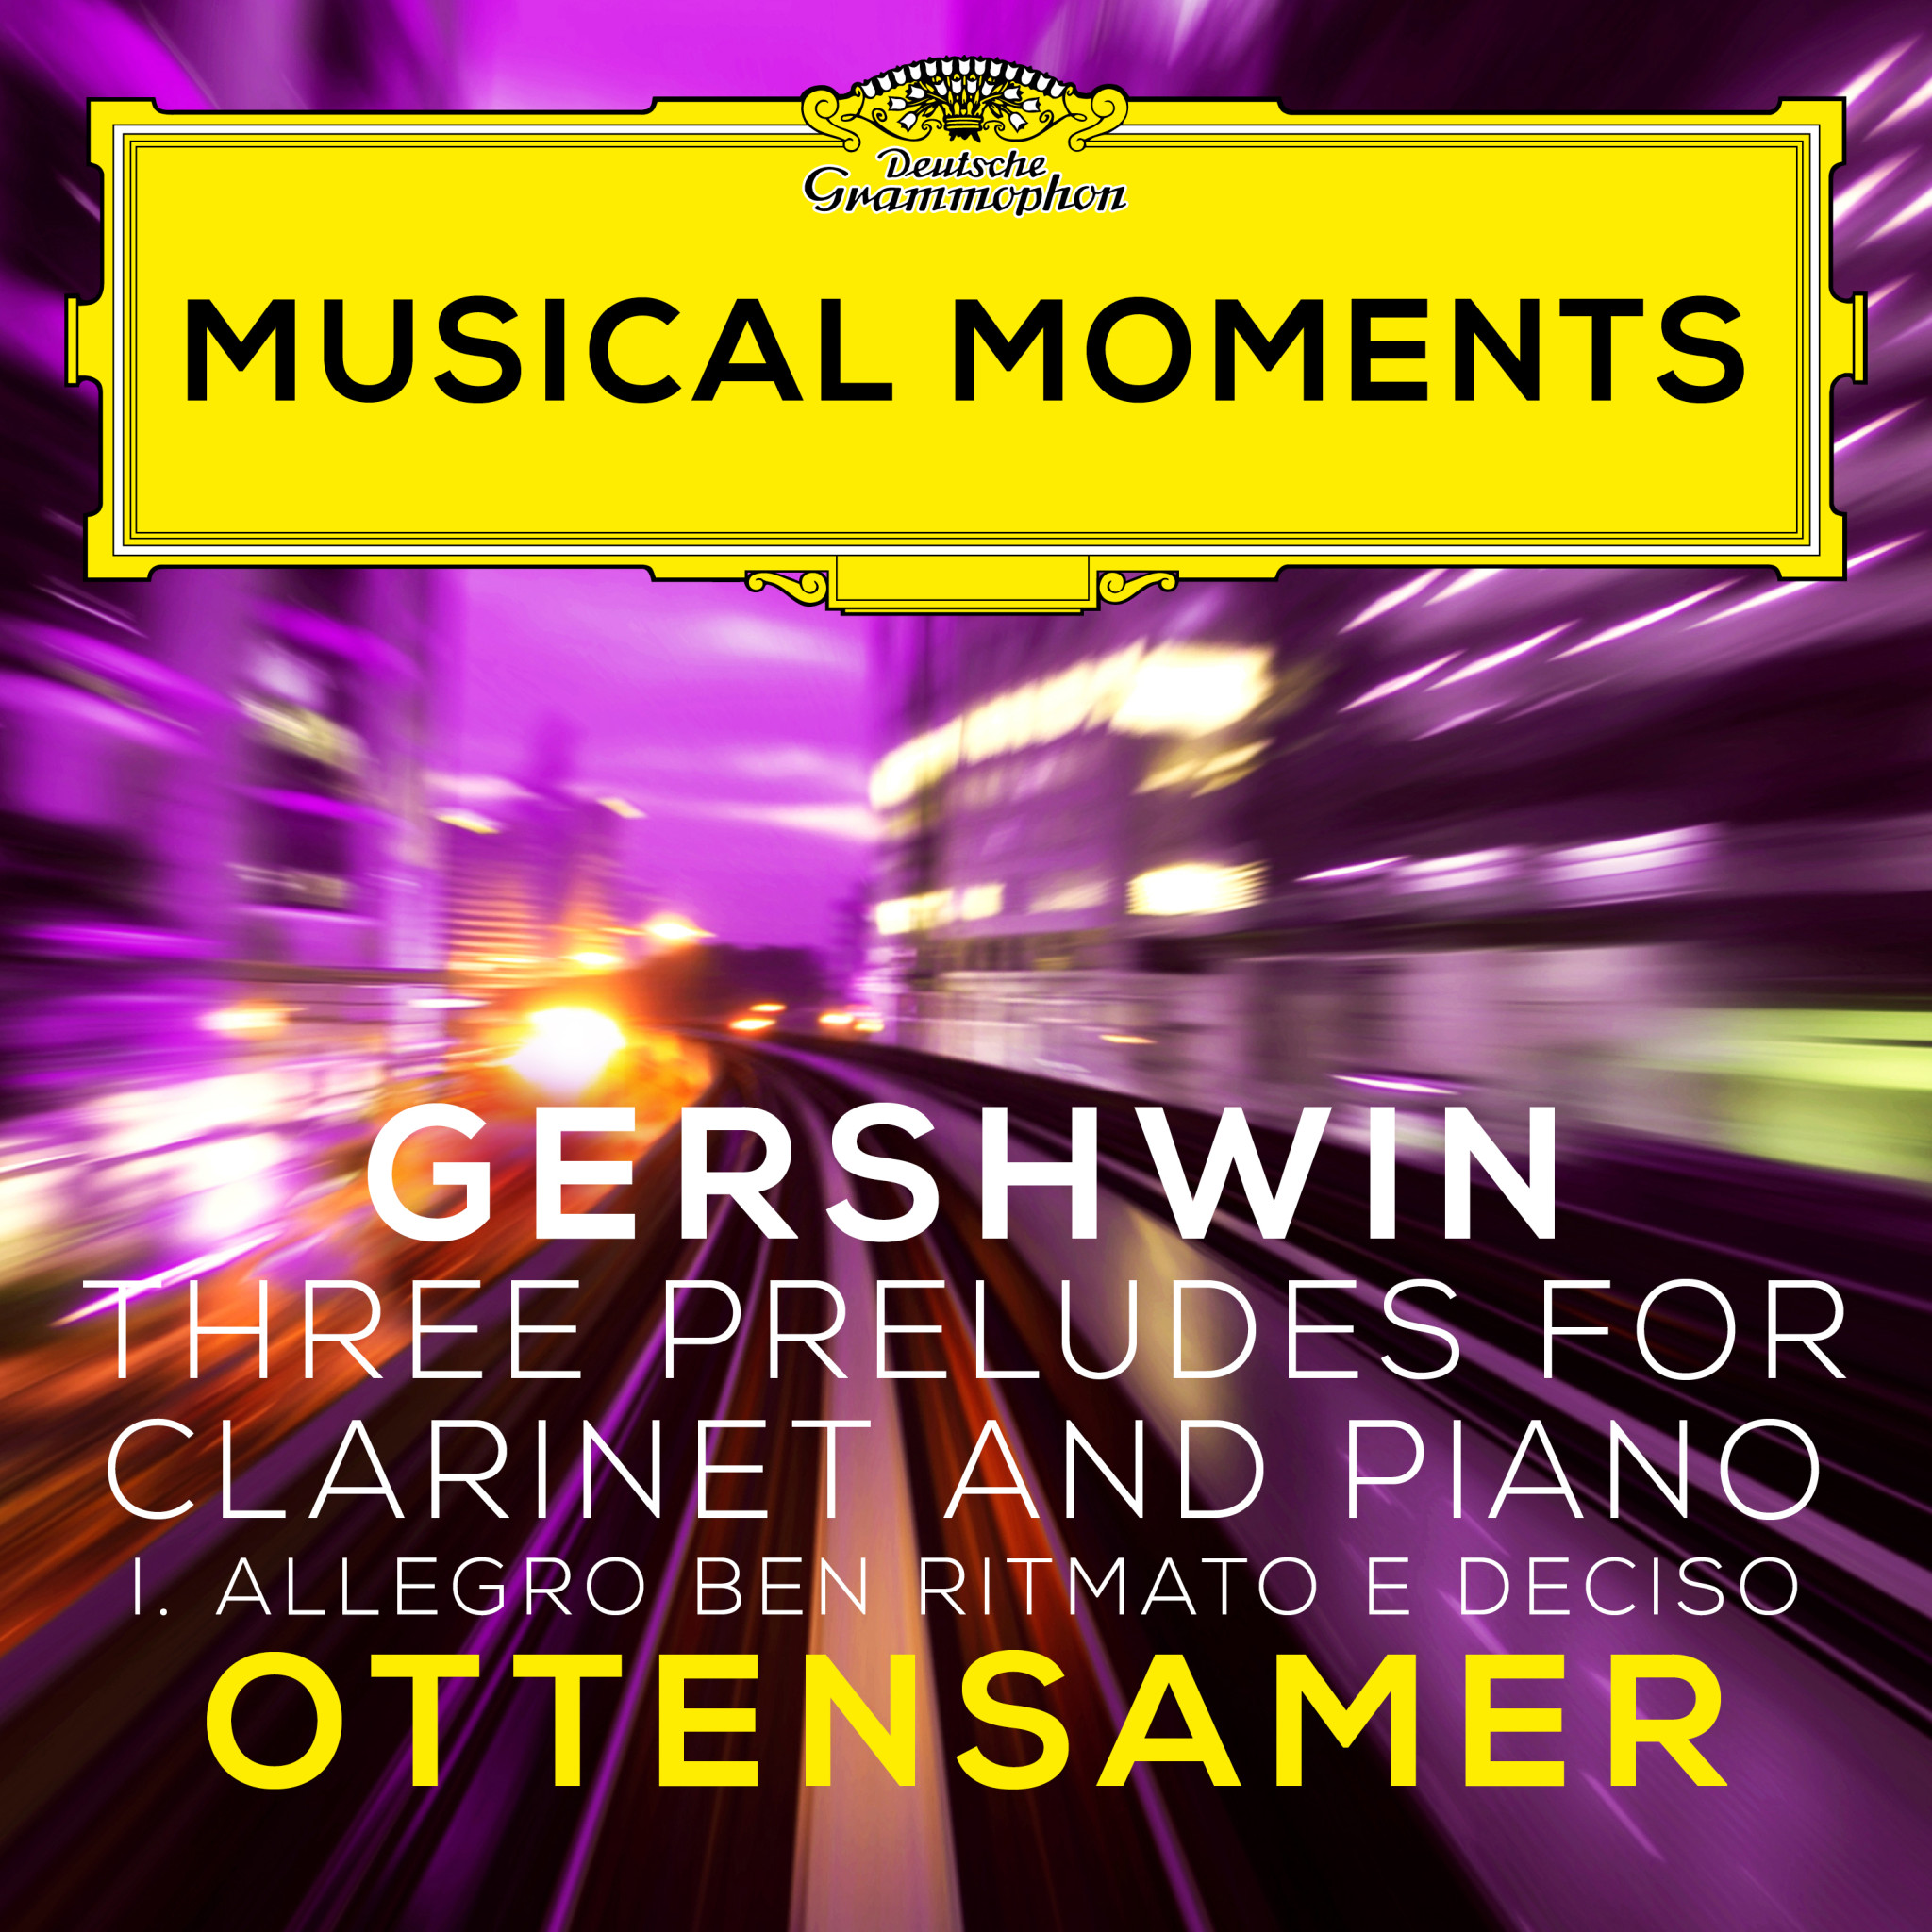 Musical Moments - Gershwin: Three Preludes for Clarinet and Piano - Ottensamer